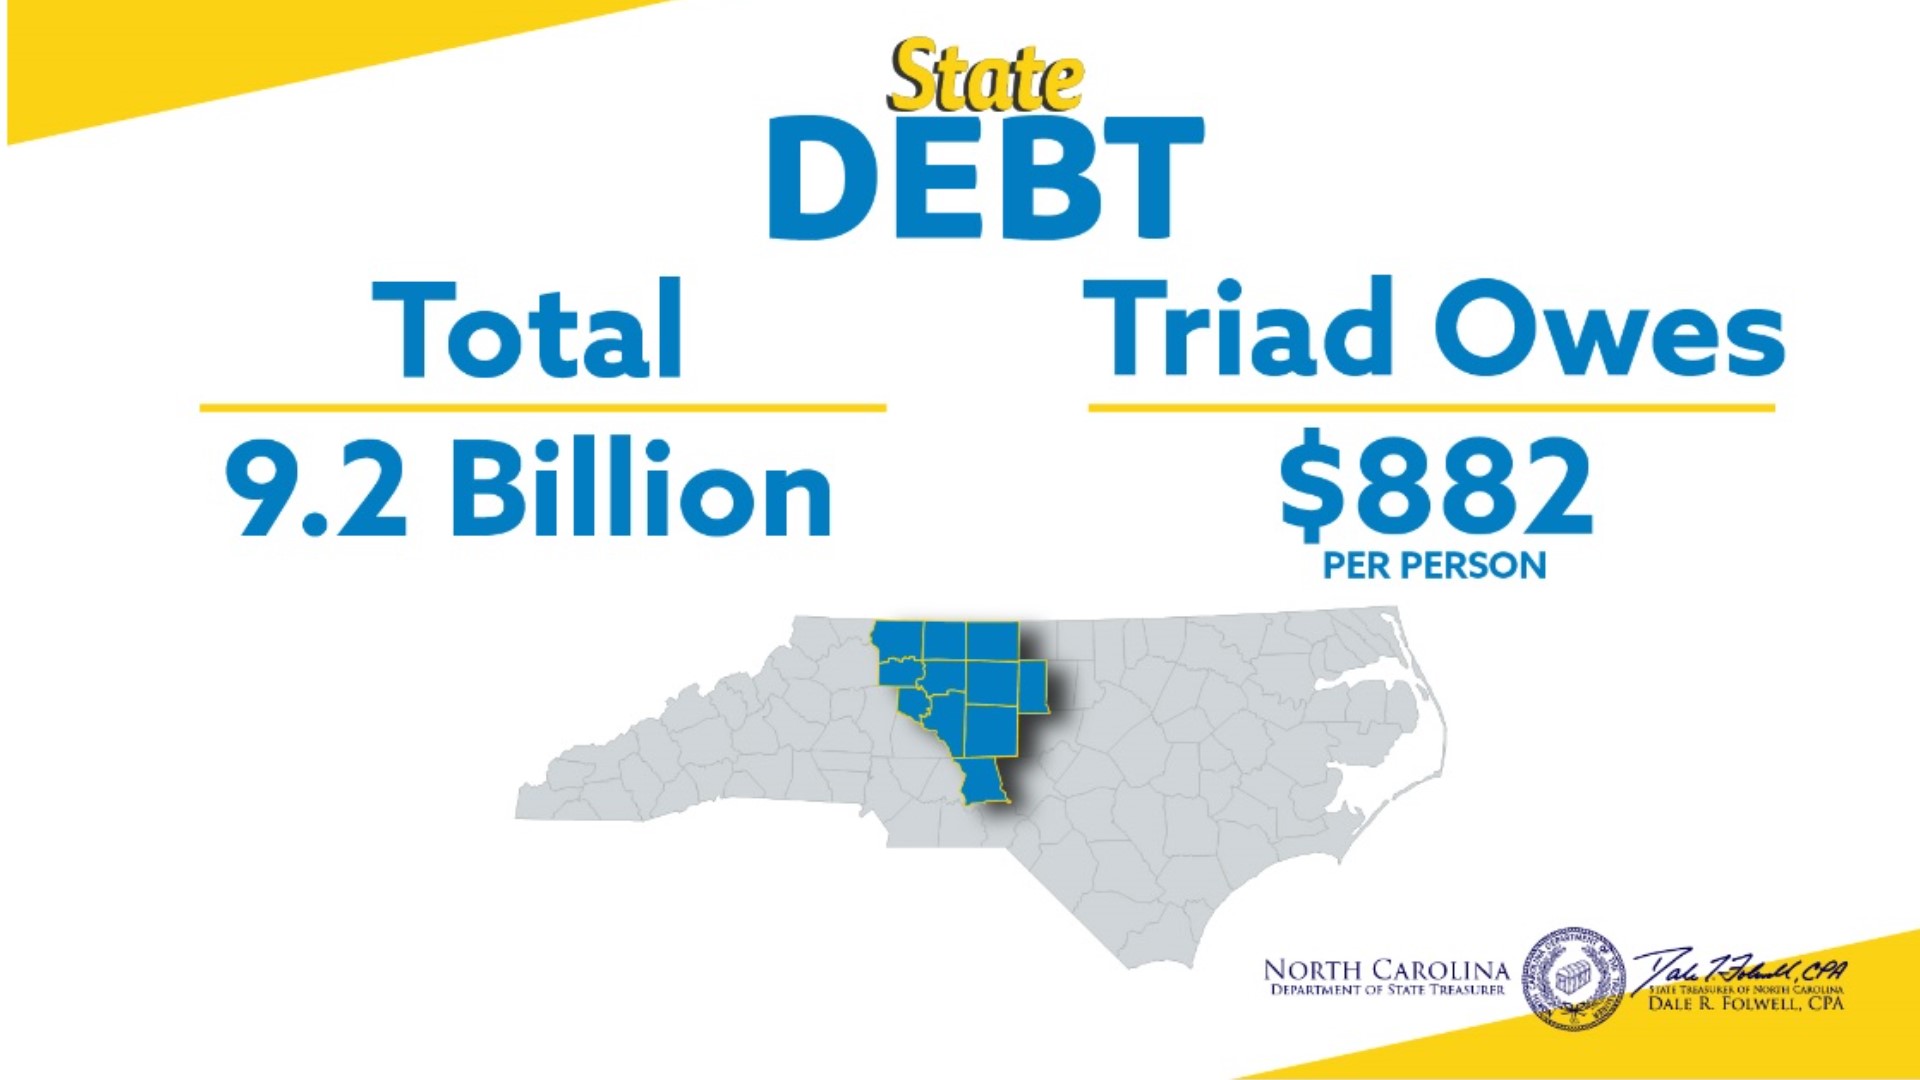 The debt affordability report studies how much debt the state has and how much more it can take on for much-needed projects.